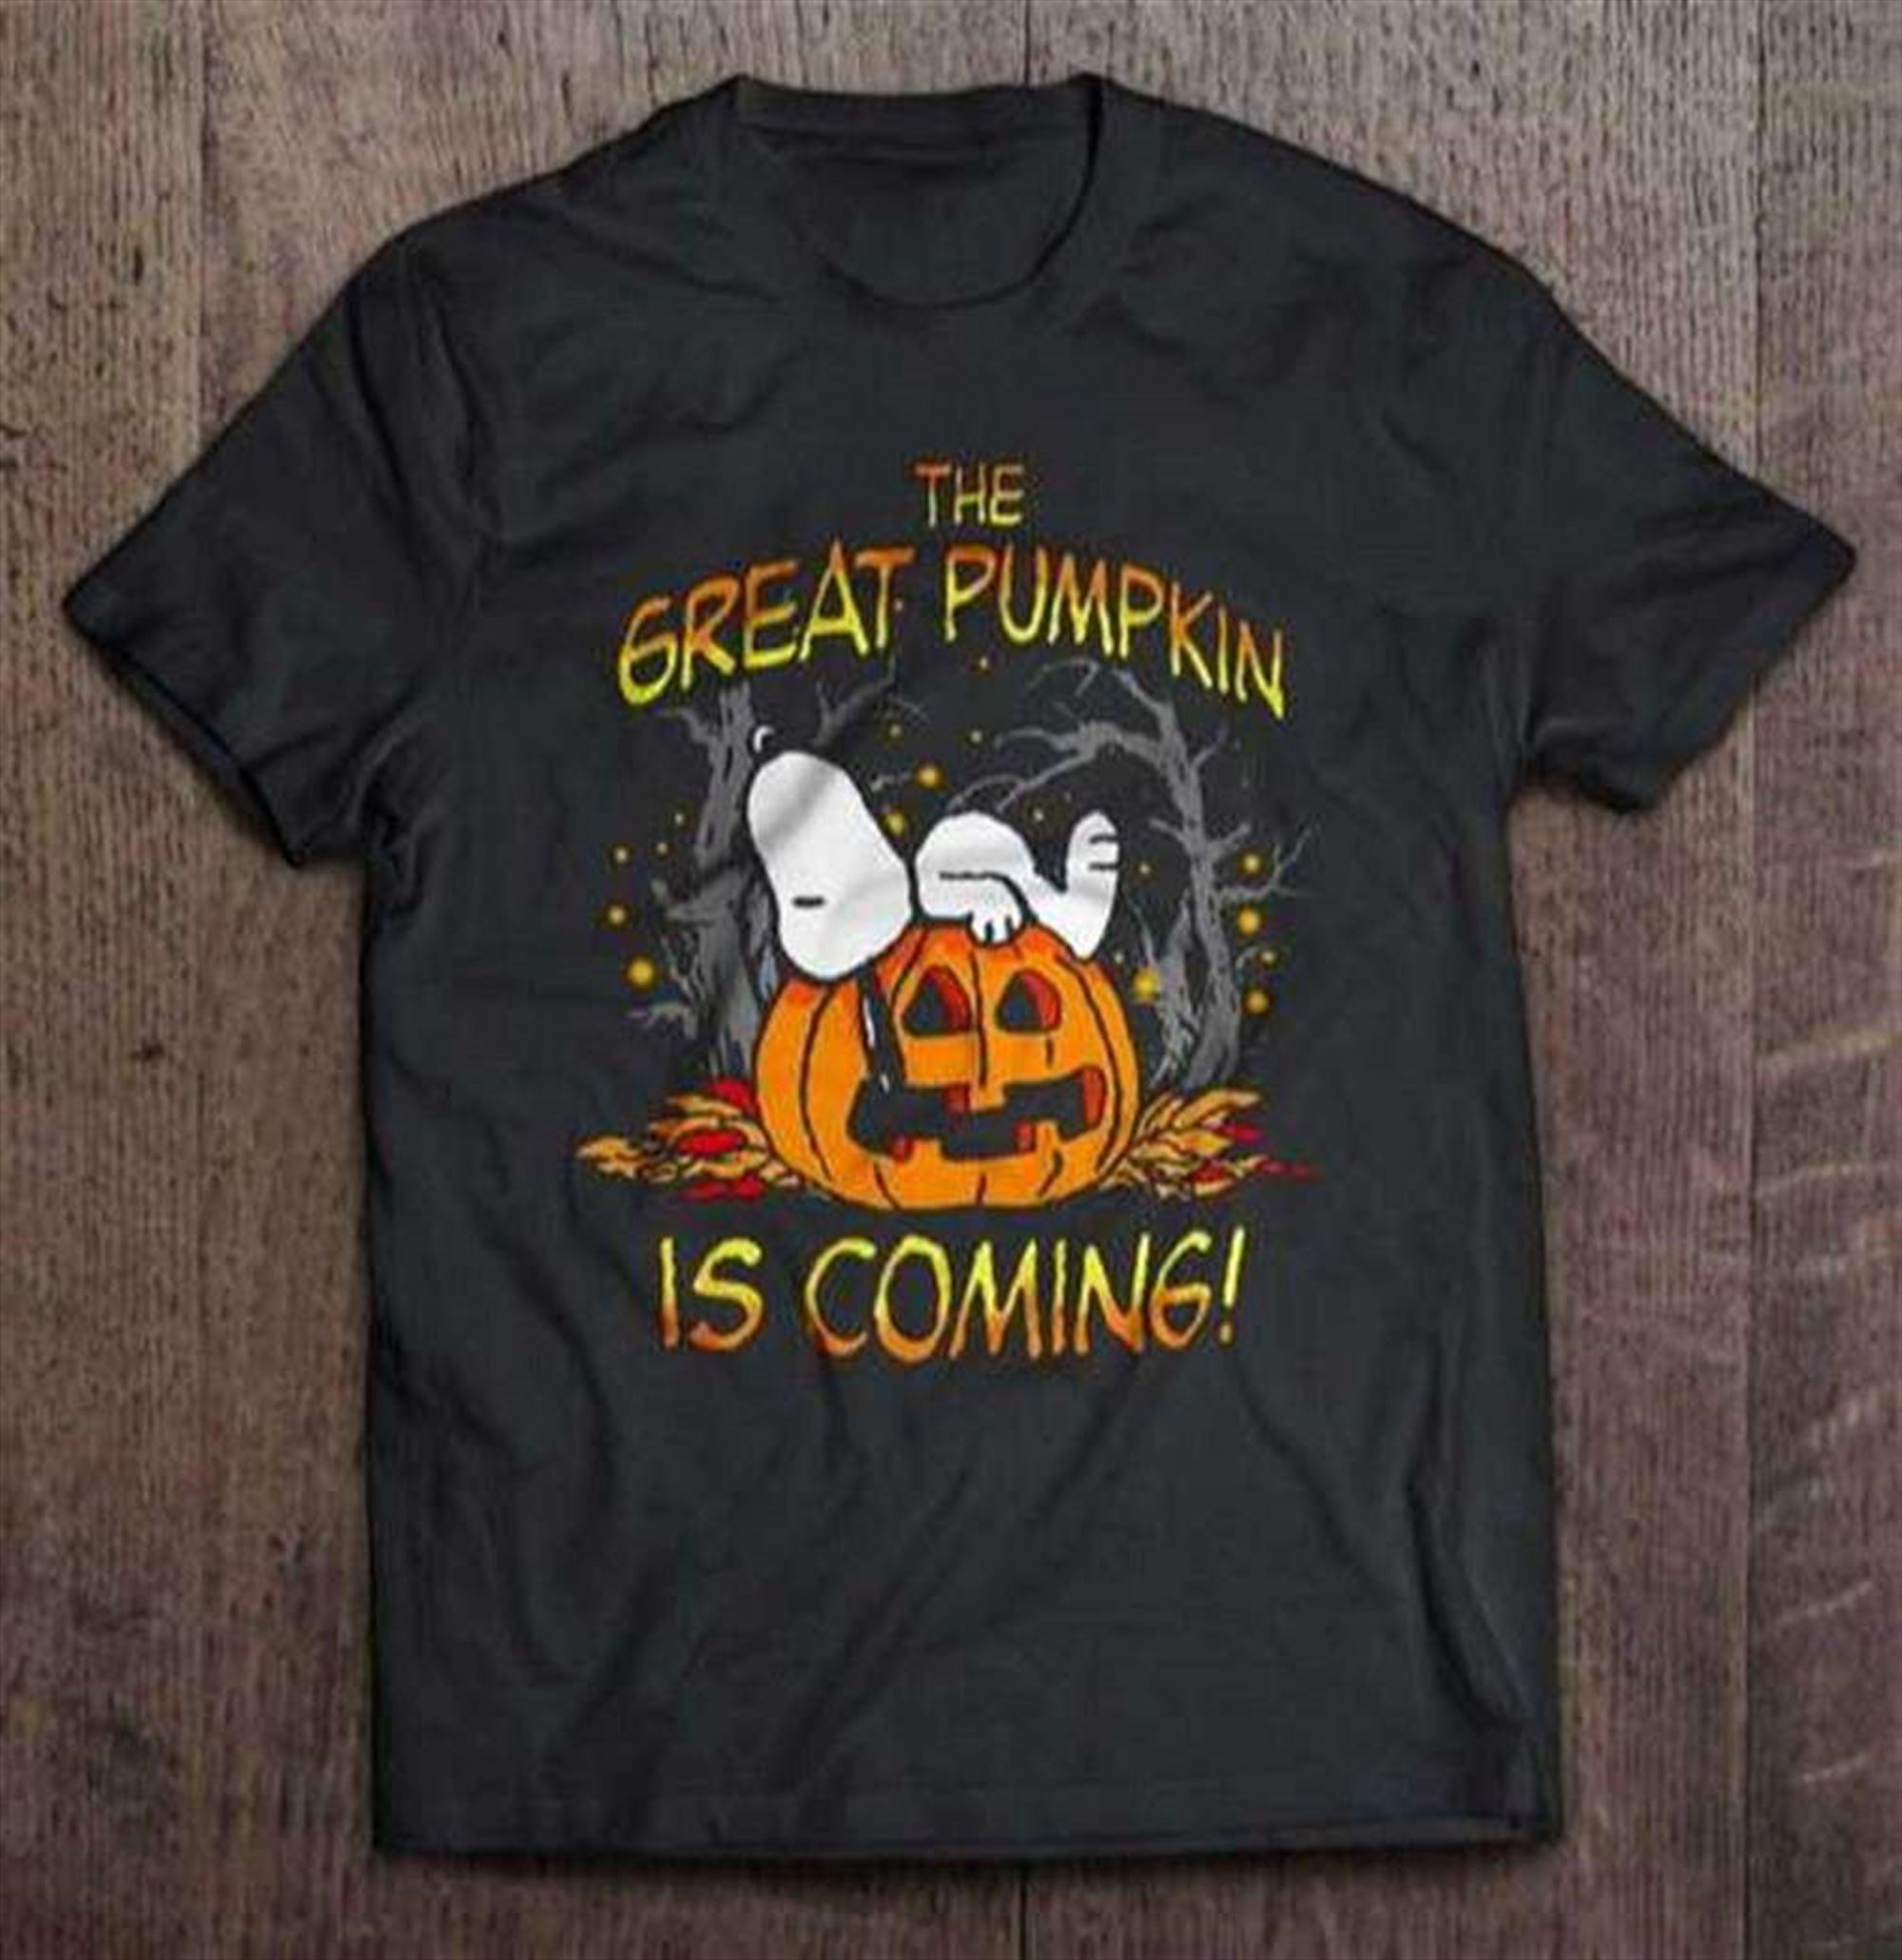 The Great Pumpkin Is Coming Snoopy Halloween T-shirt Size Up To 5xl